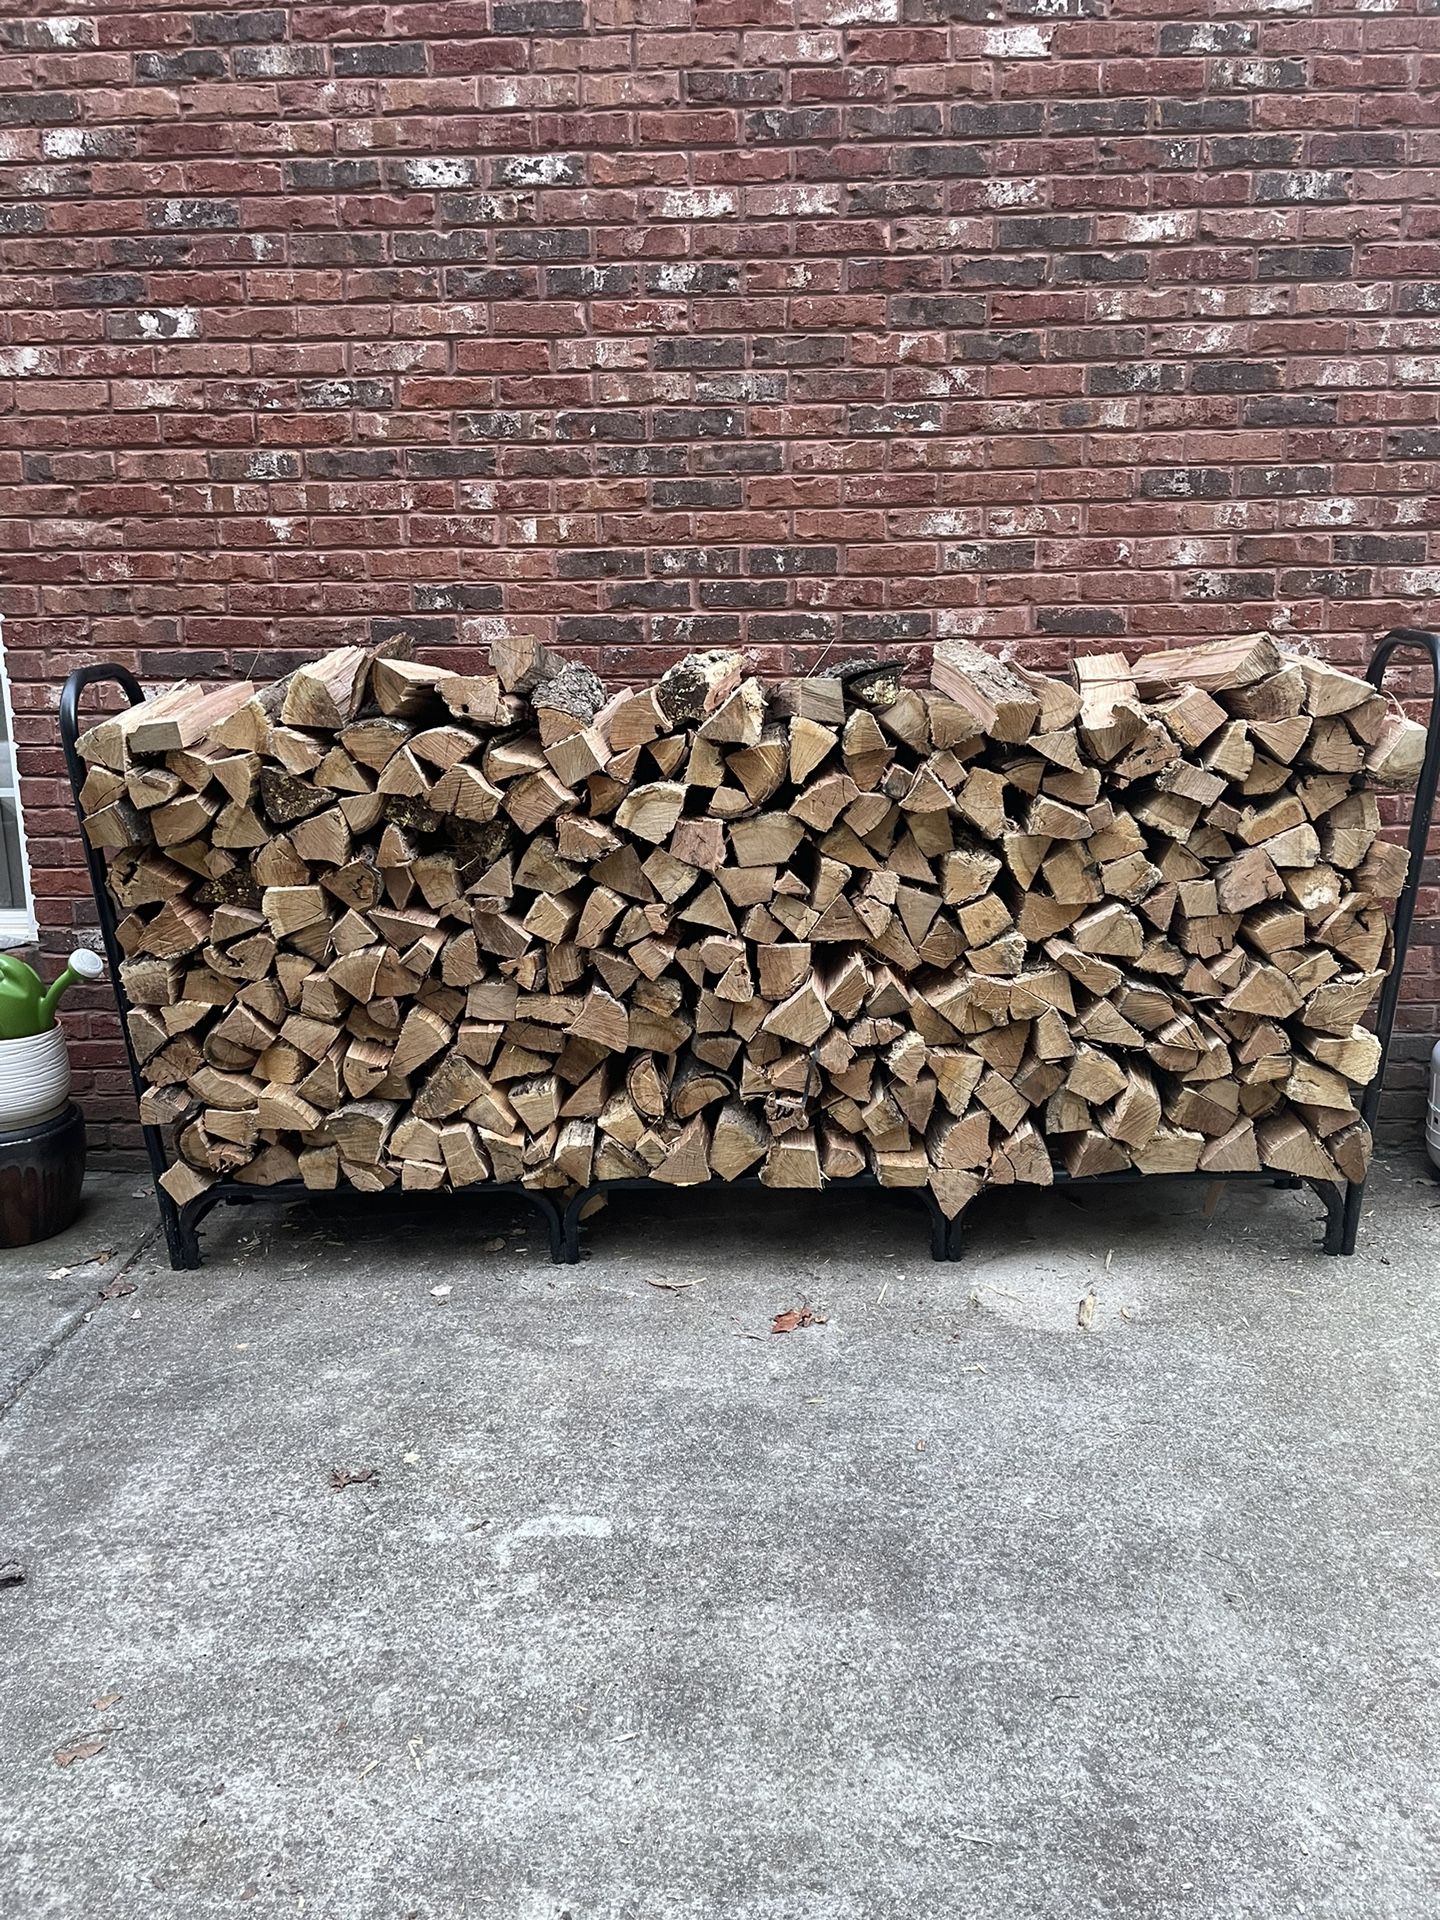 Firewood And More!